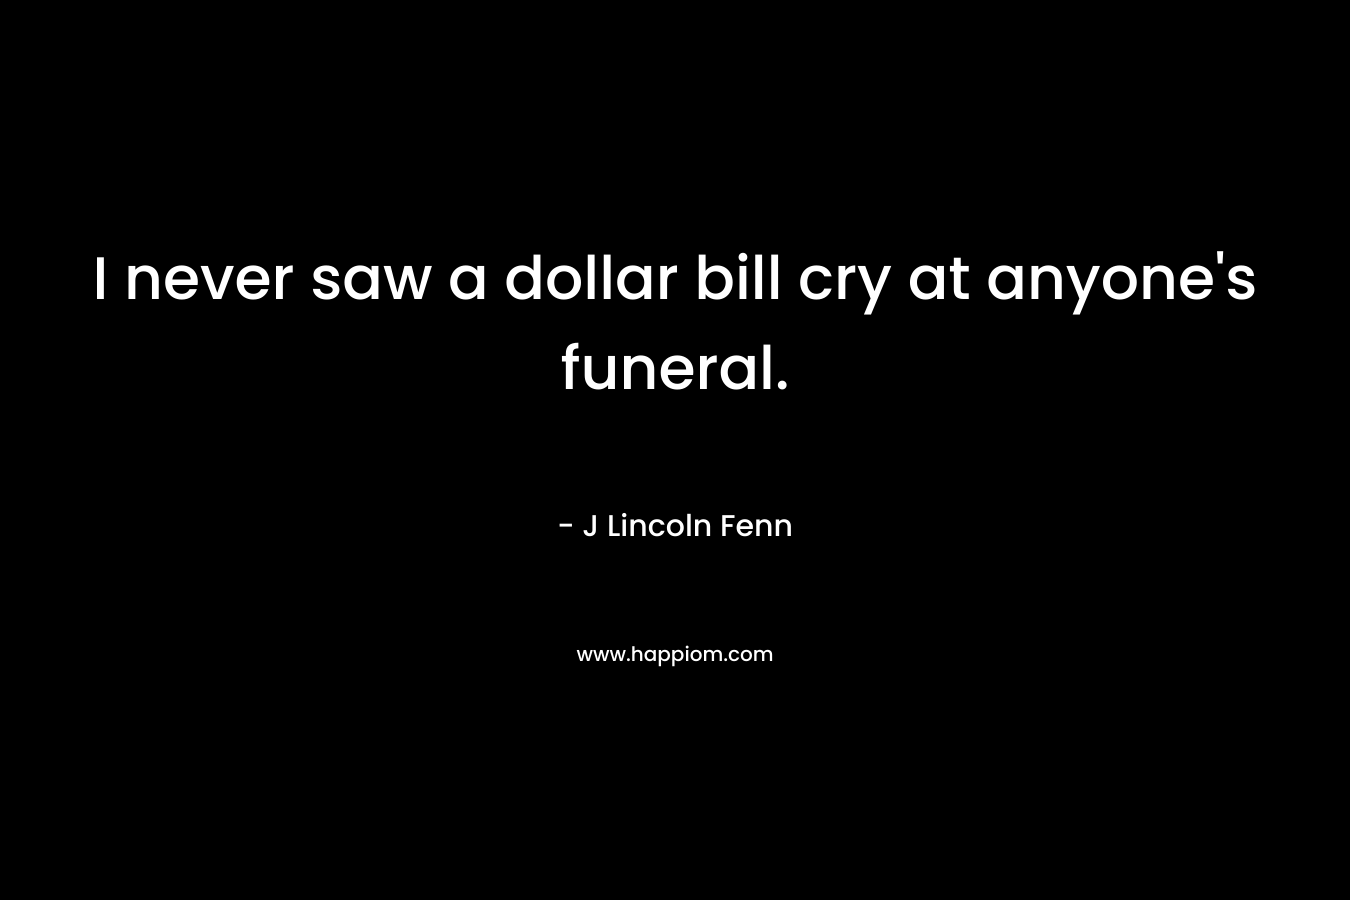 I never saw a dollar bill cry at anyone's funeral.